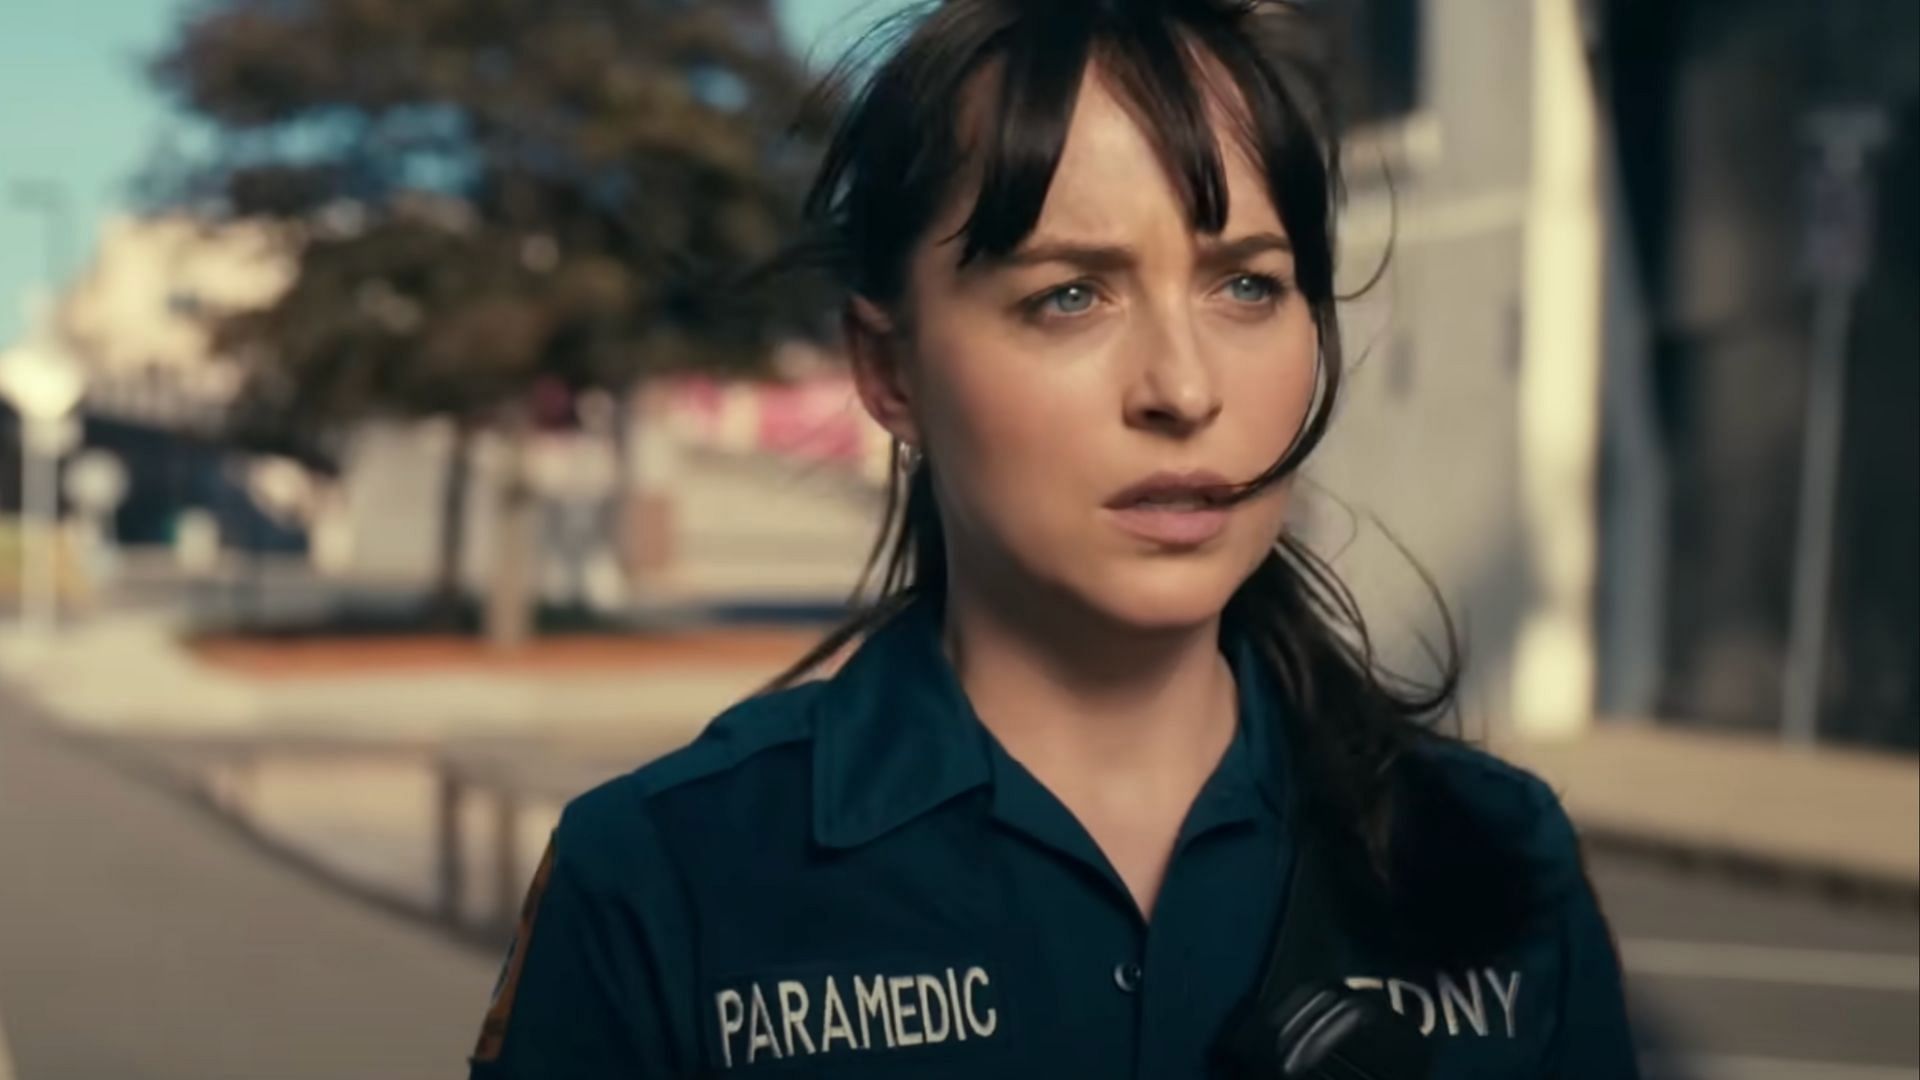 Dakota Johnson. on a still from the trailer (Image via YouTube/Sony Pictures Entertainment, 1:03)